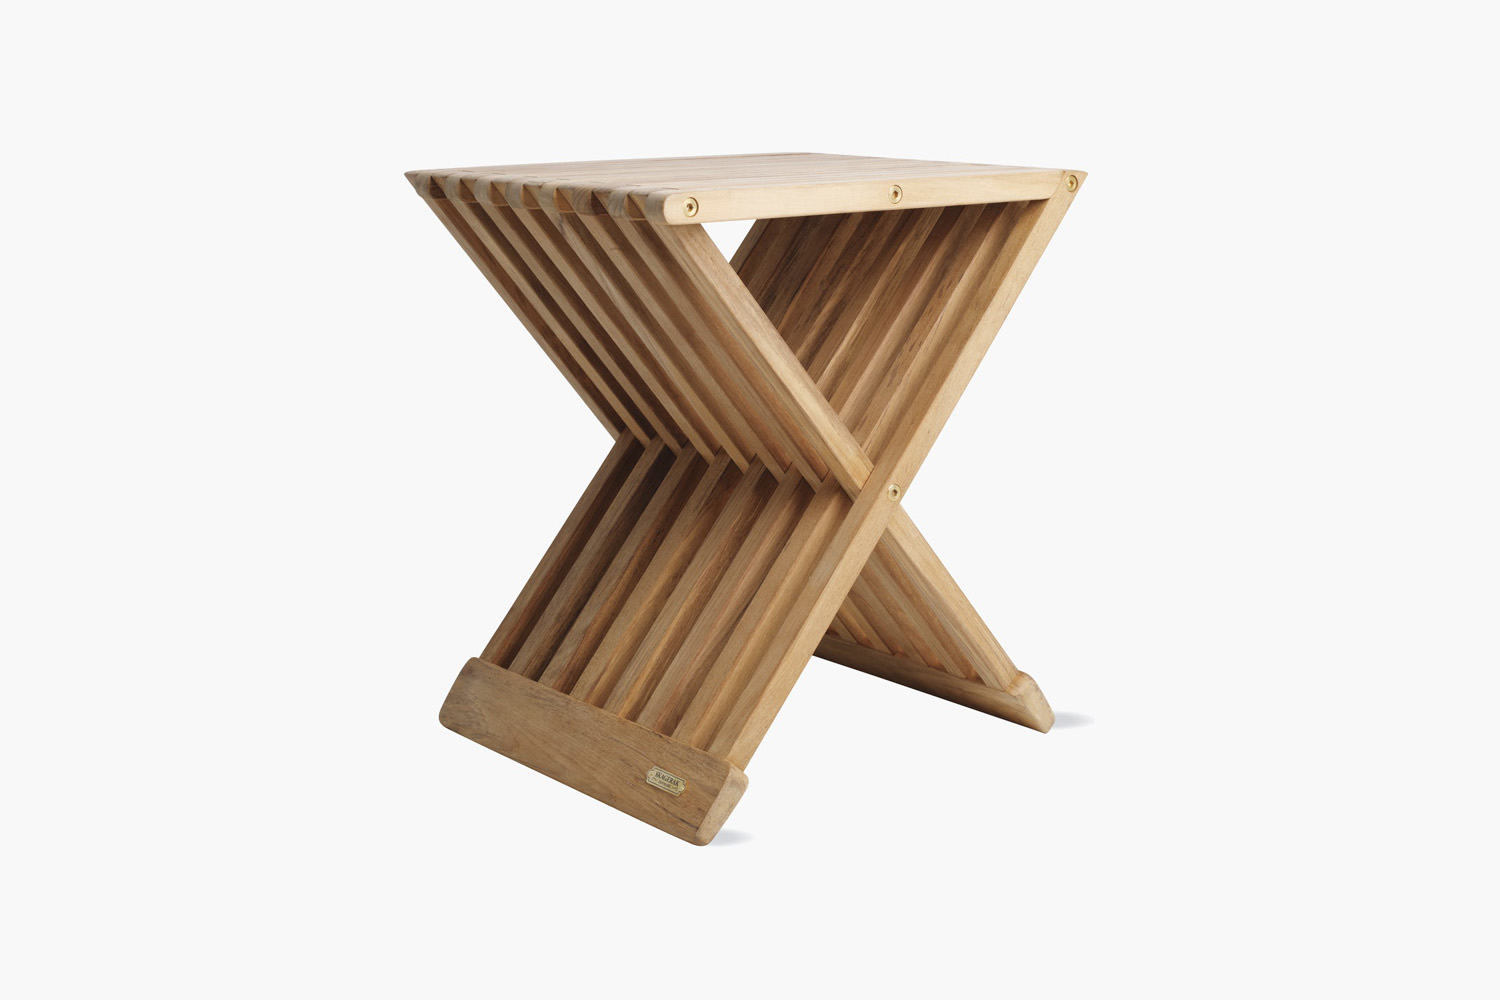 the skagerak fionia stool, designed by jens quistgaard, comes in teak; \$336 at 12